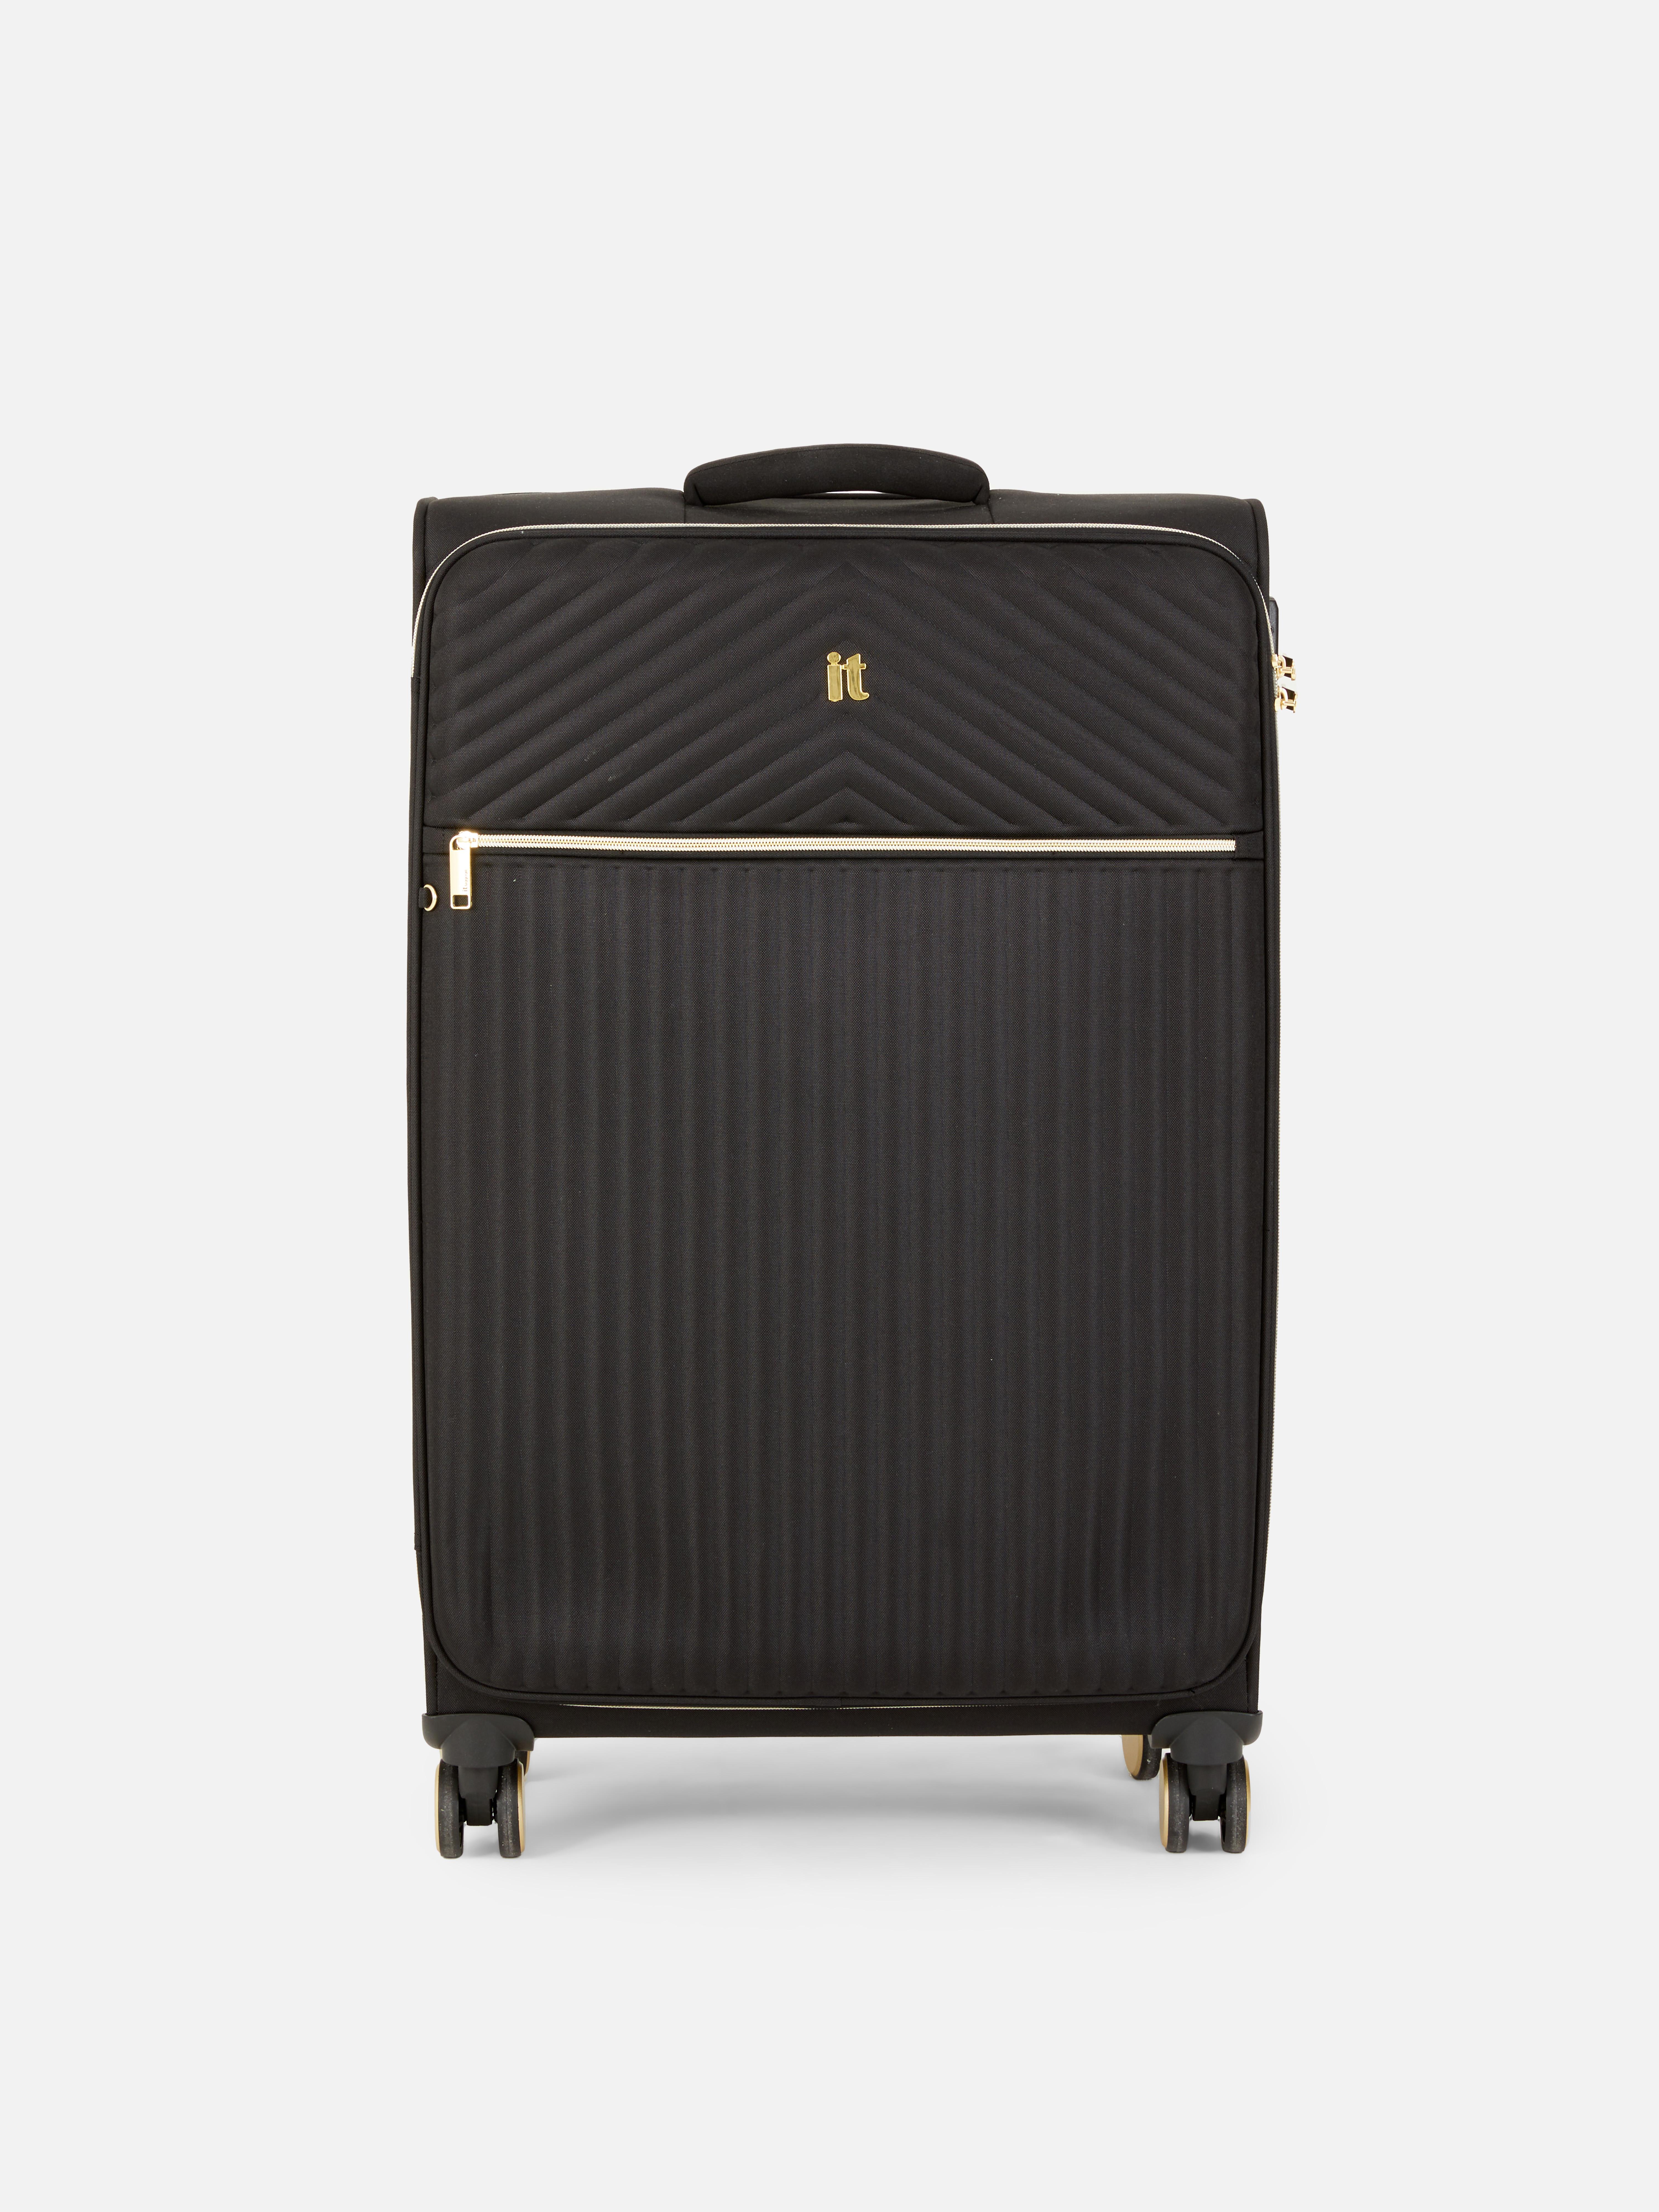 it Luggage Soft Shell Quilted Suitcase